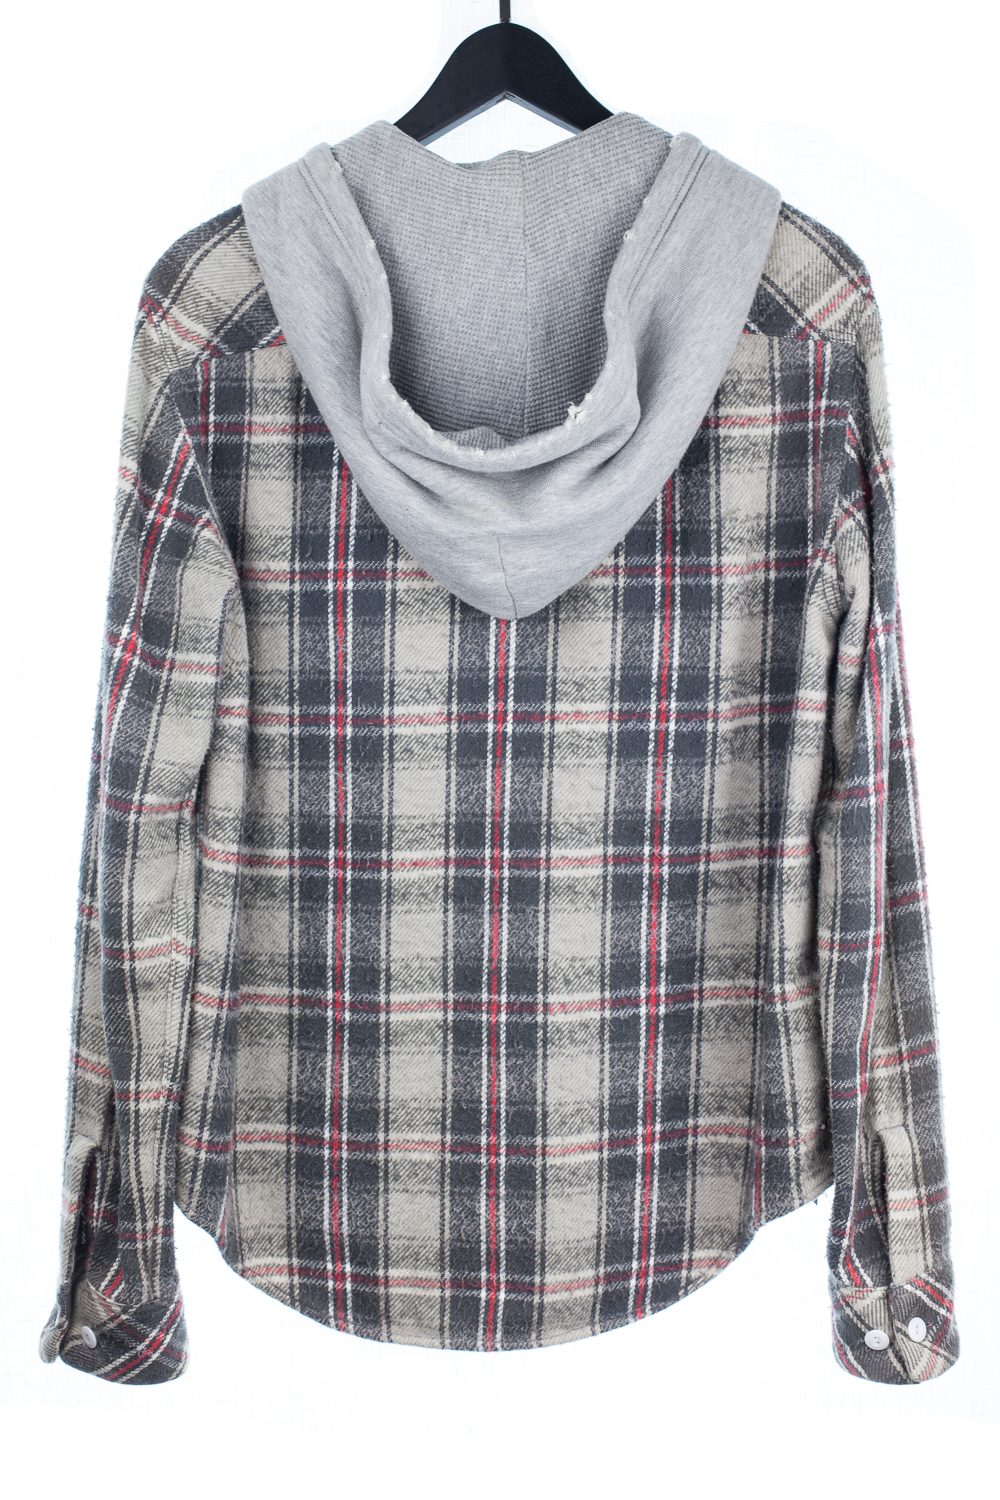 FW05 “The High Streets” Hooded Flannel